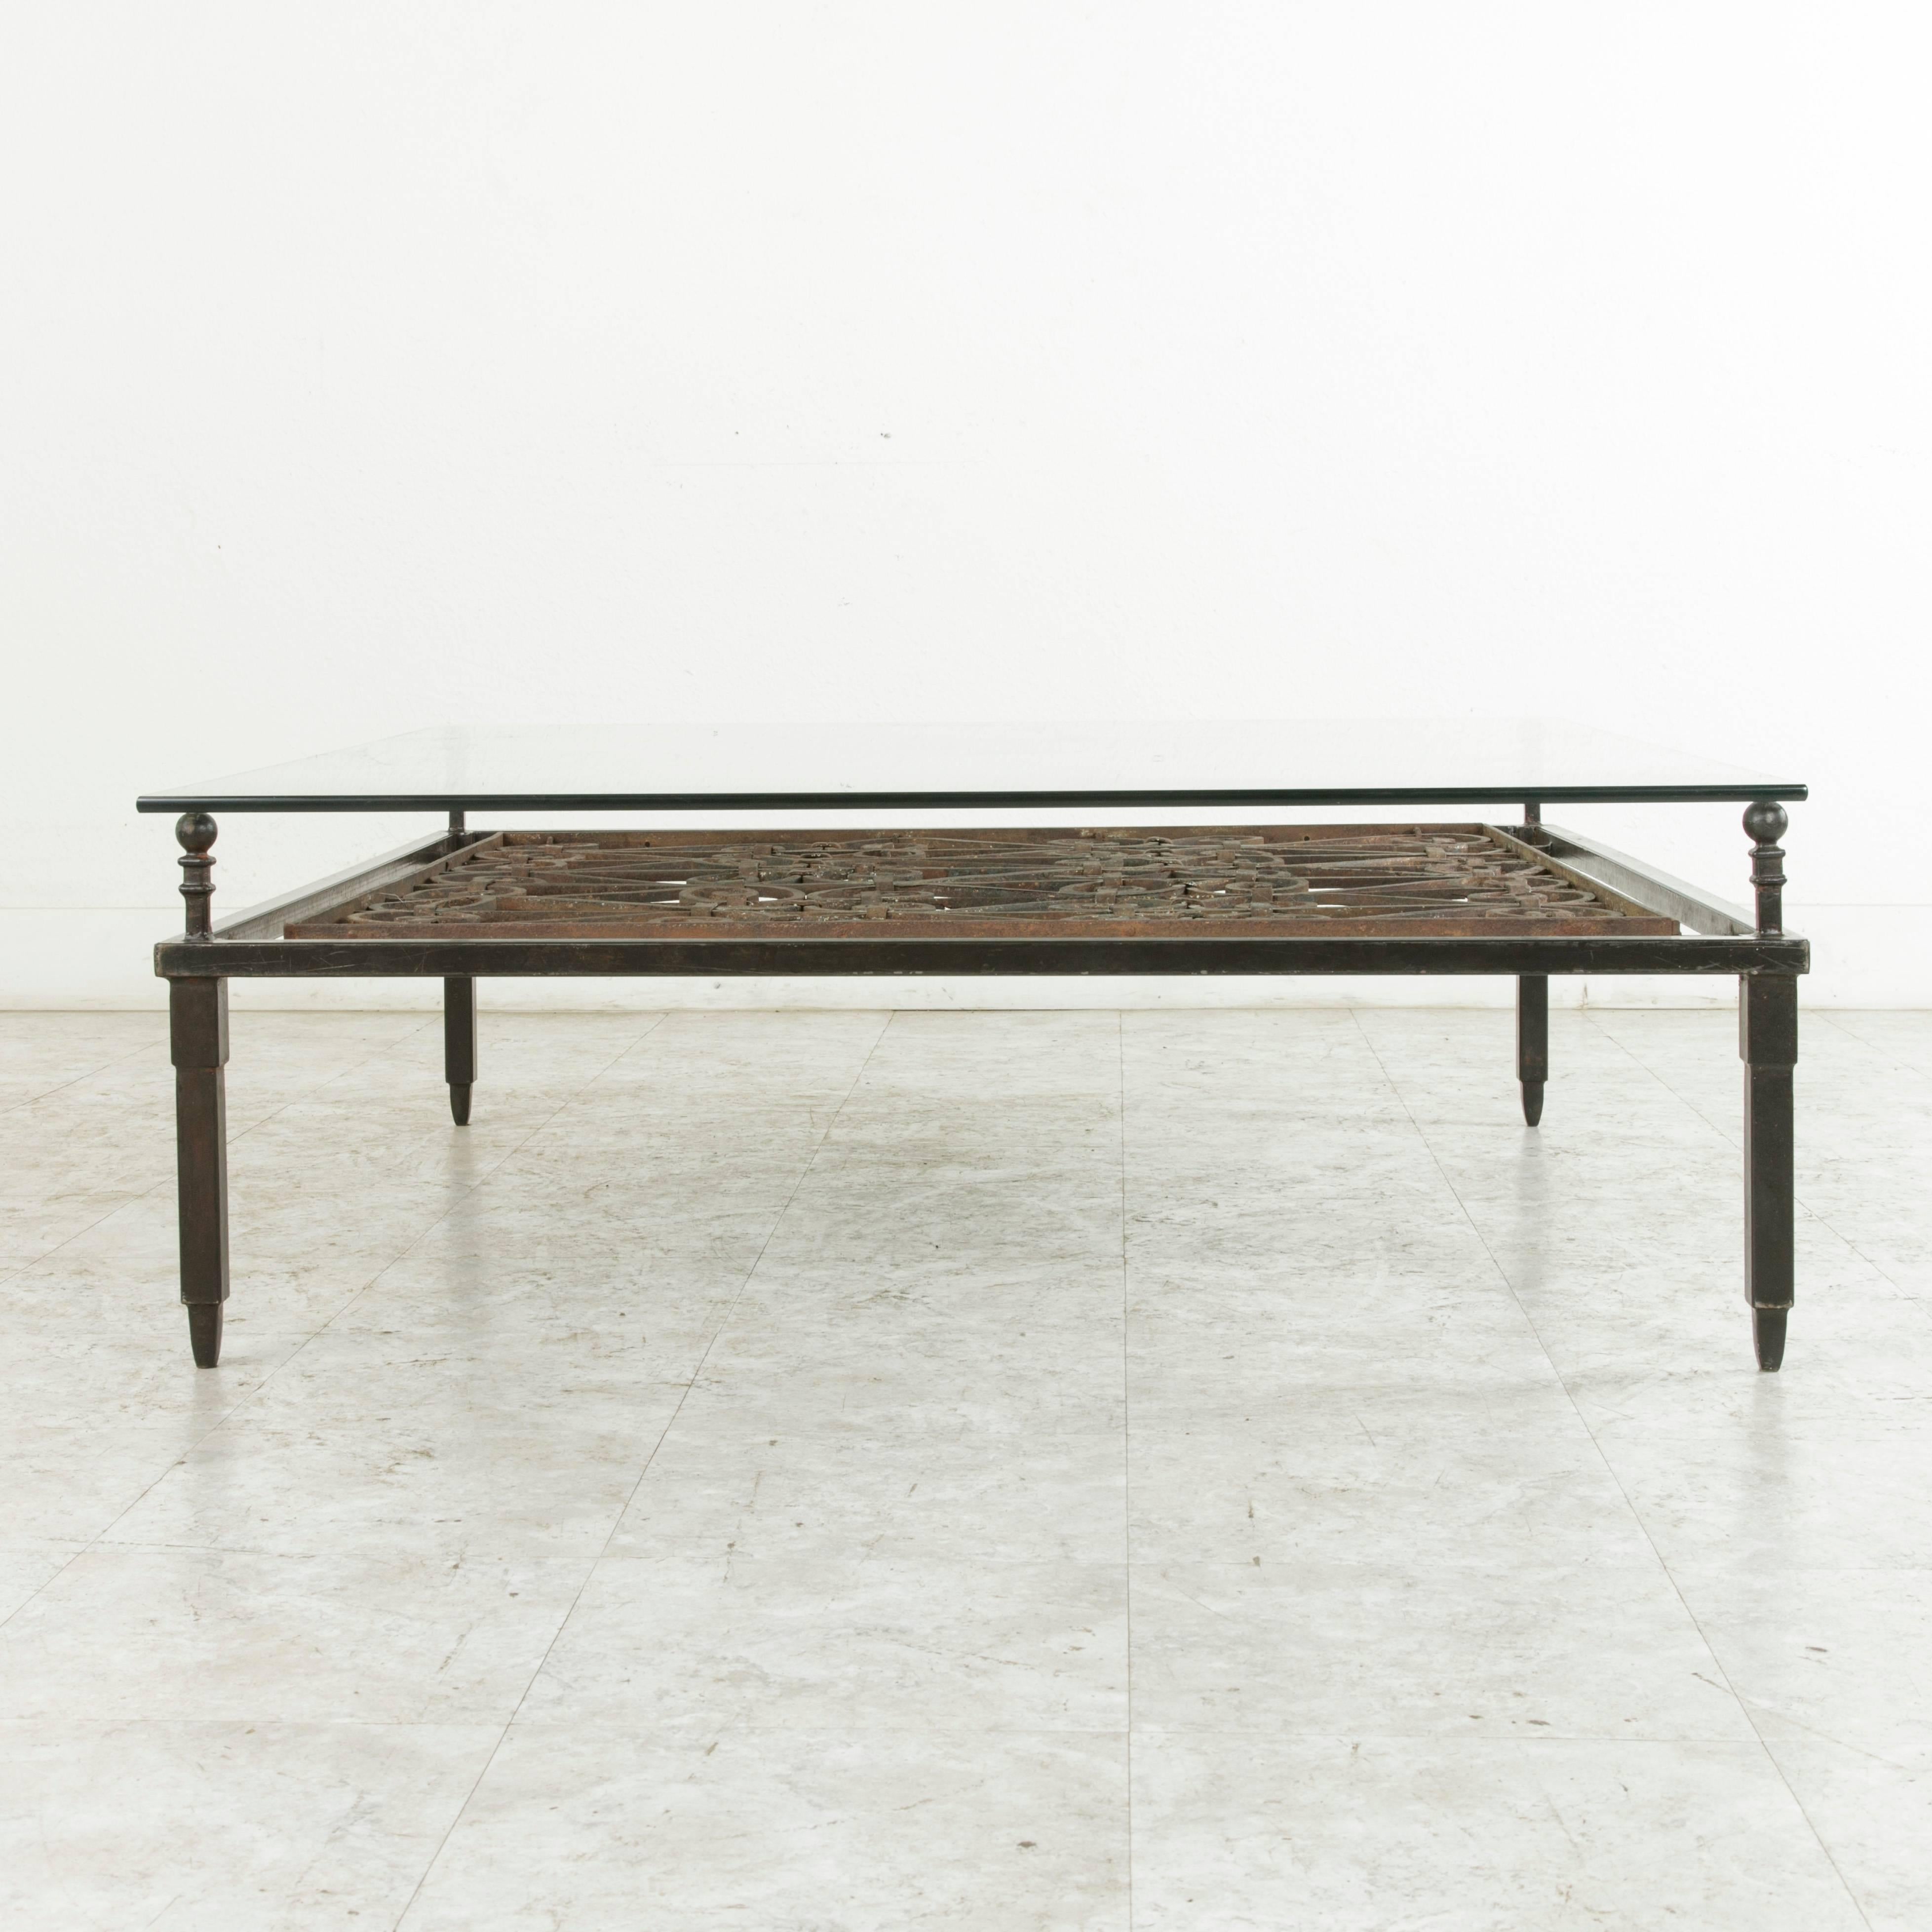 Large 18th Century Forged Iron Grill Converted into Coffee Table with Glass Top 1